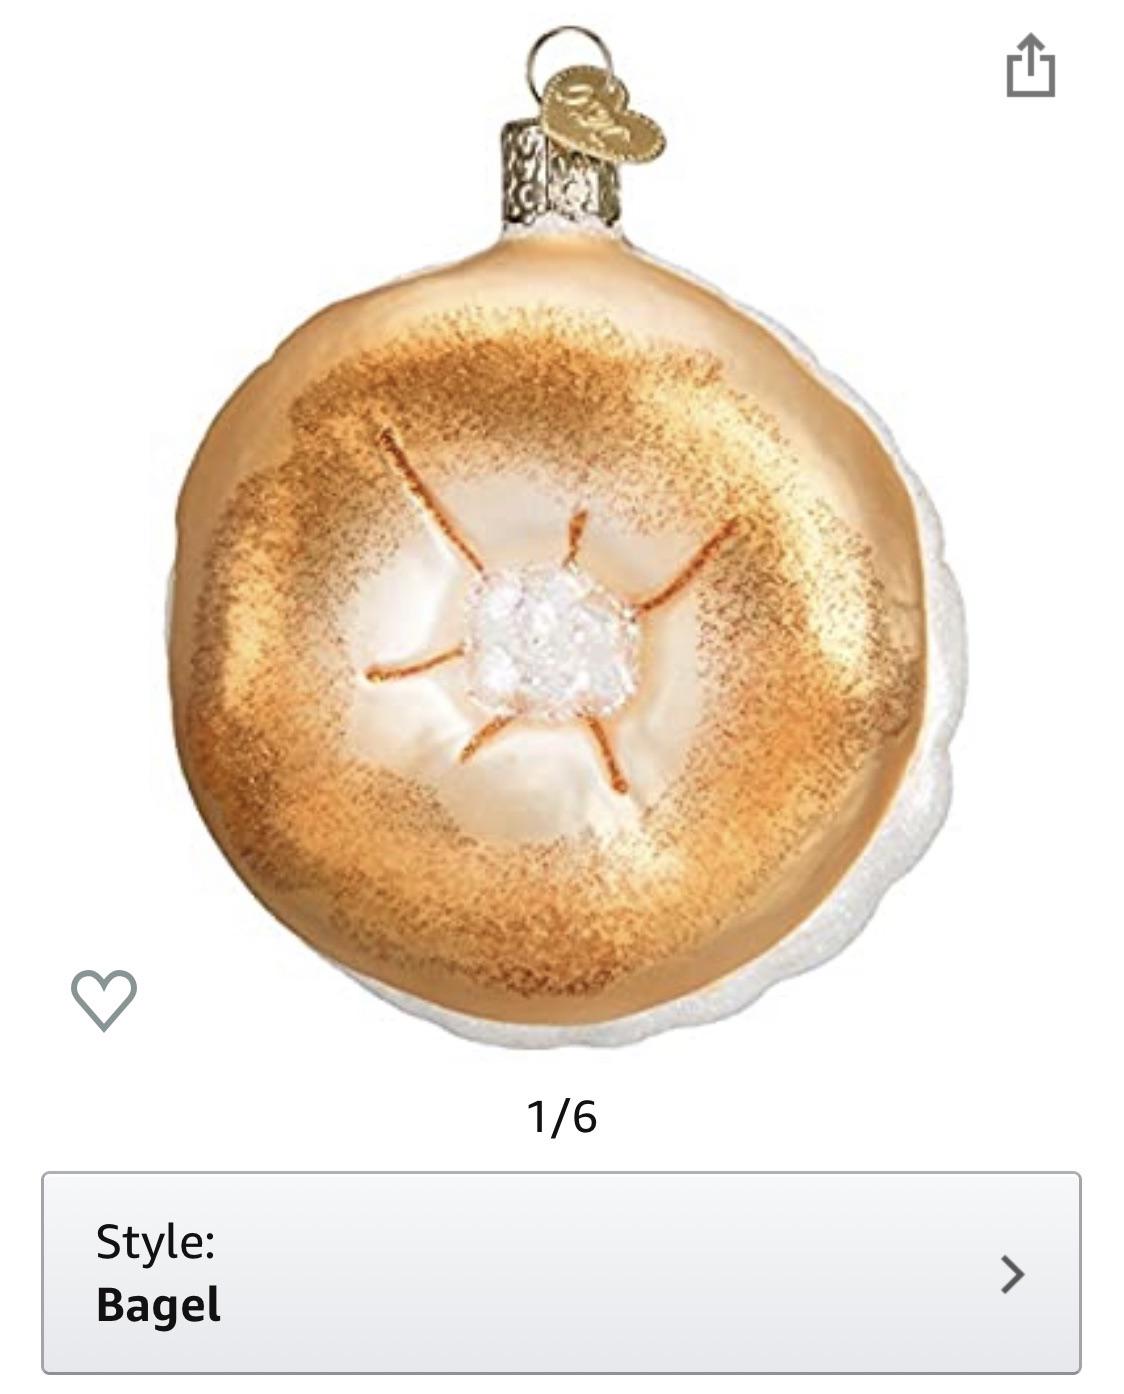 r/mildlybutthole - This year’s Christmas ornaments are going to be interesting.